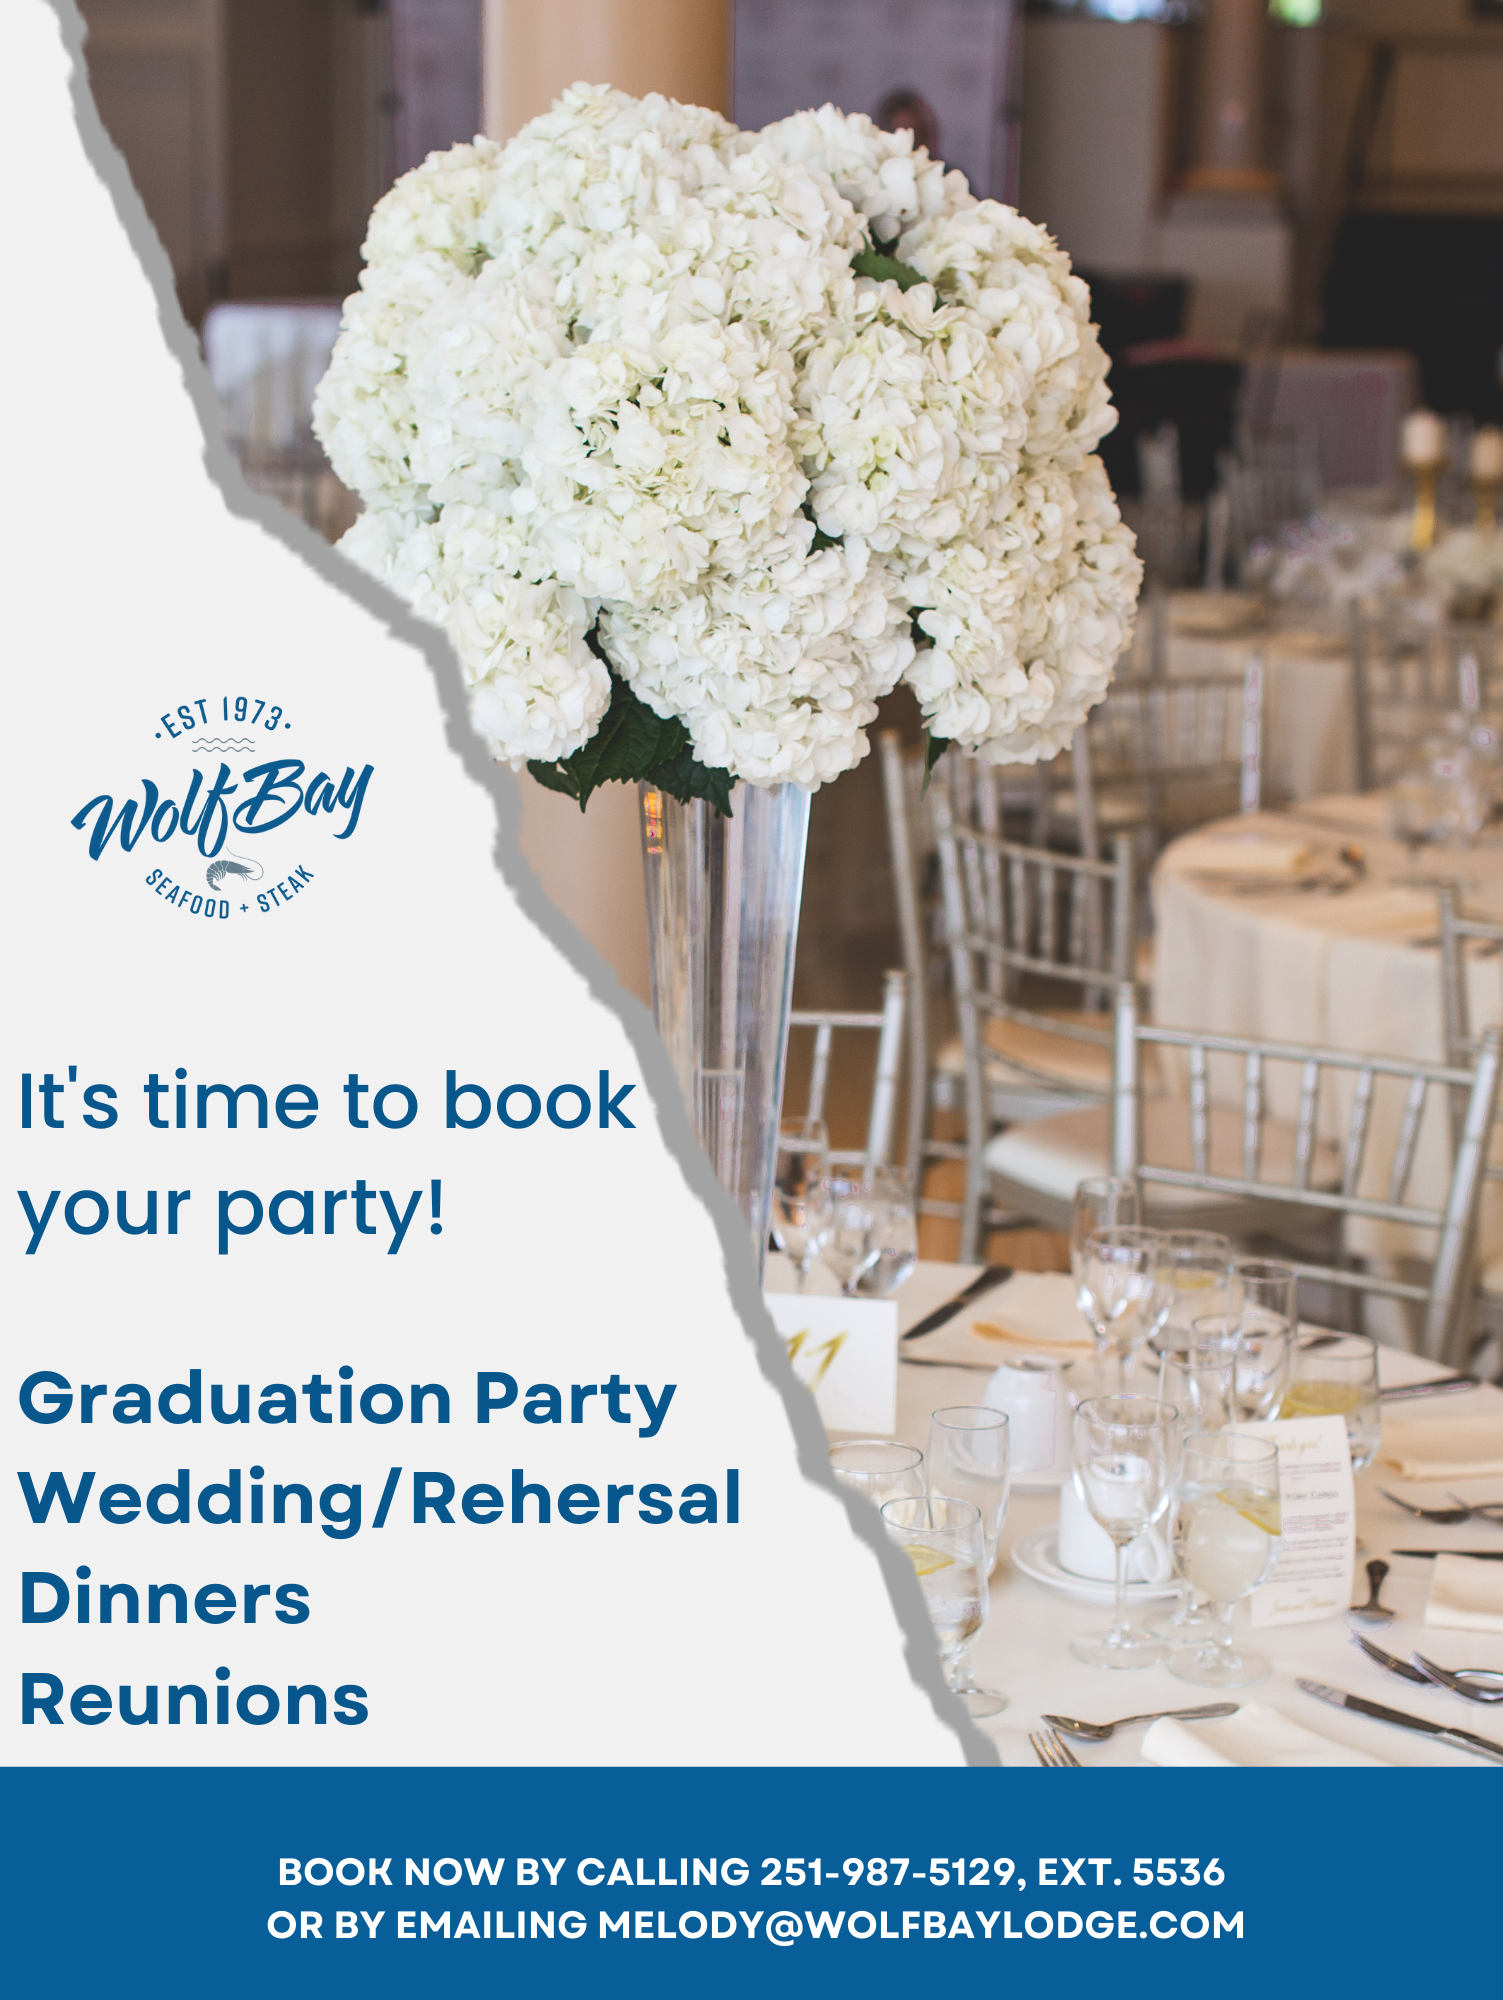 Book Your Event at Wolf Bay Today!